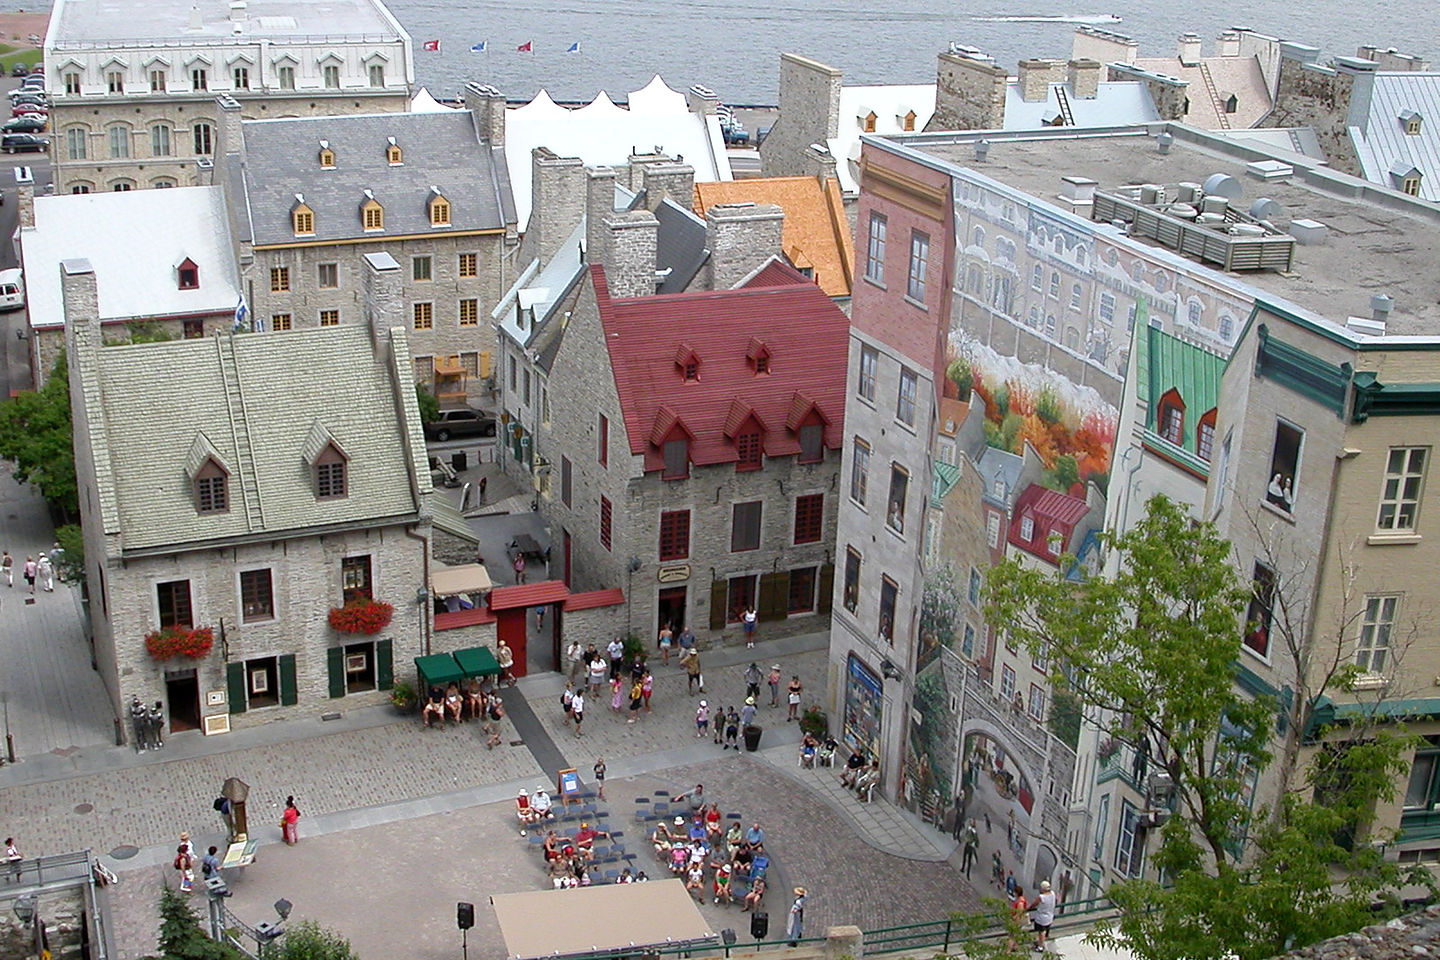 Looking down on the rue du Petit-Champlain.